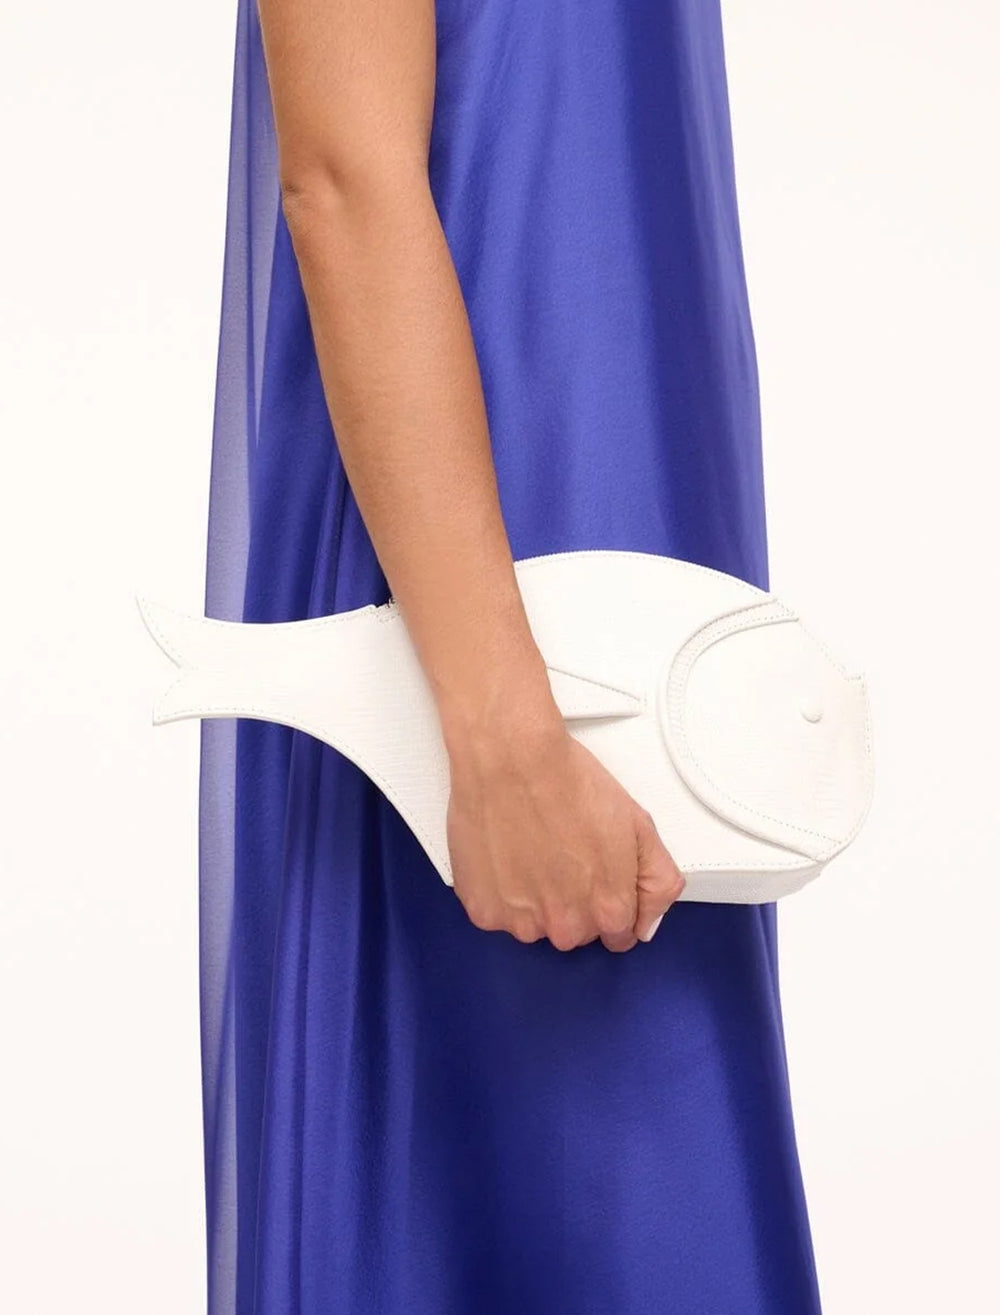 Model carrying STAUD's pesce leather clutch in paper.